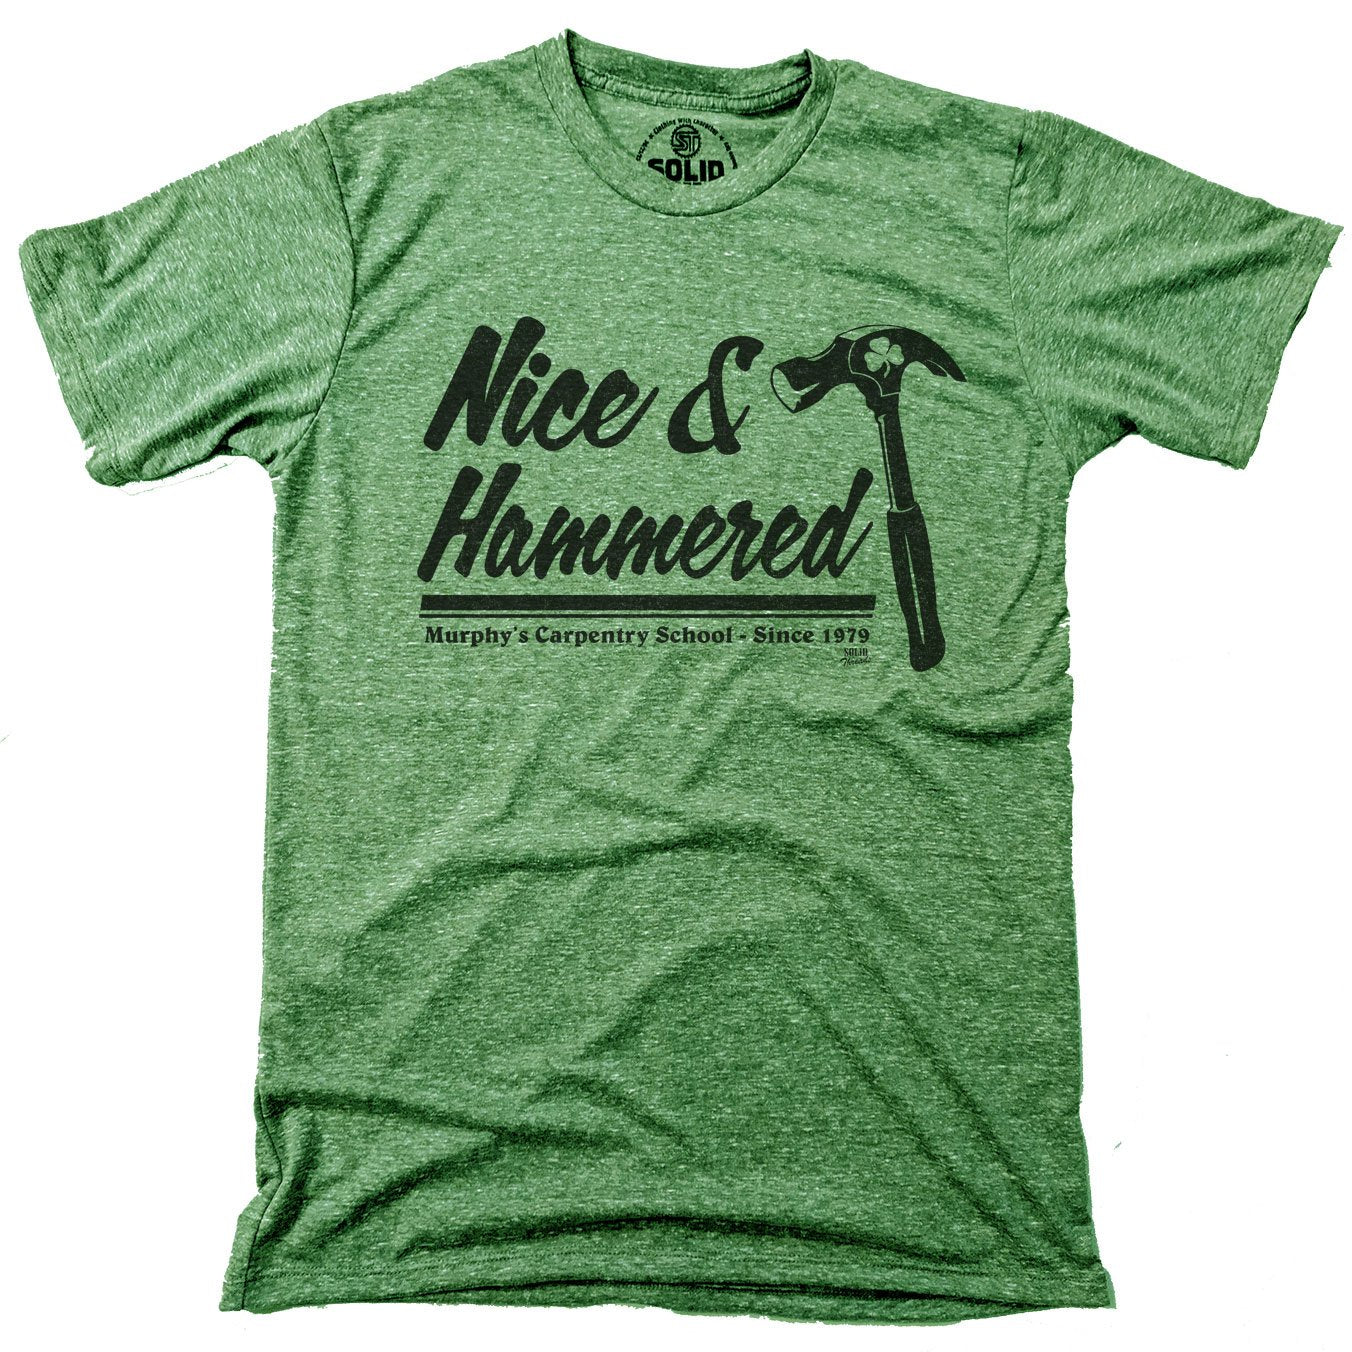 Nice & Hammered Inspired T-shirt - Solid Threads